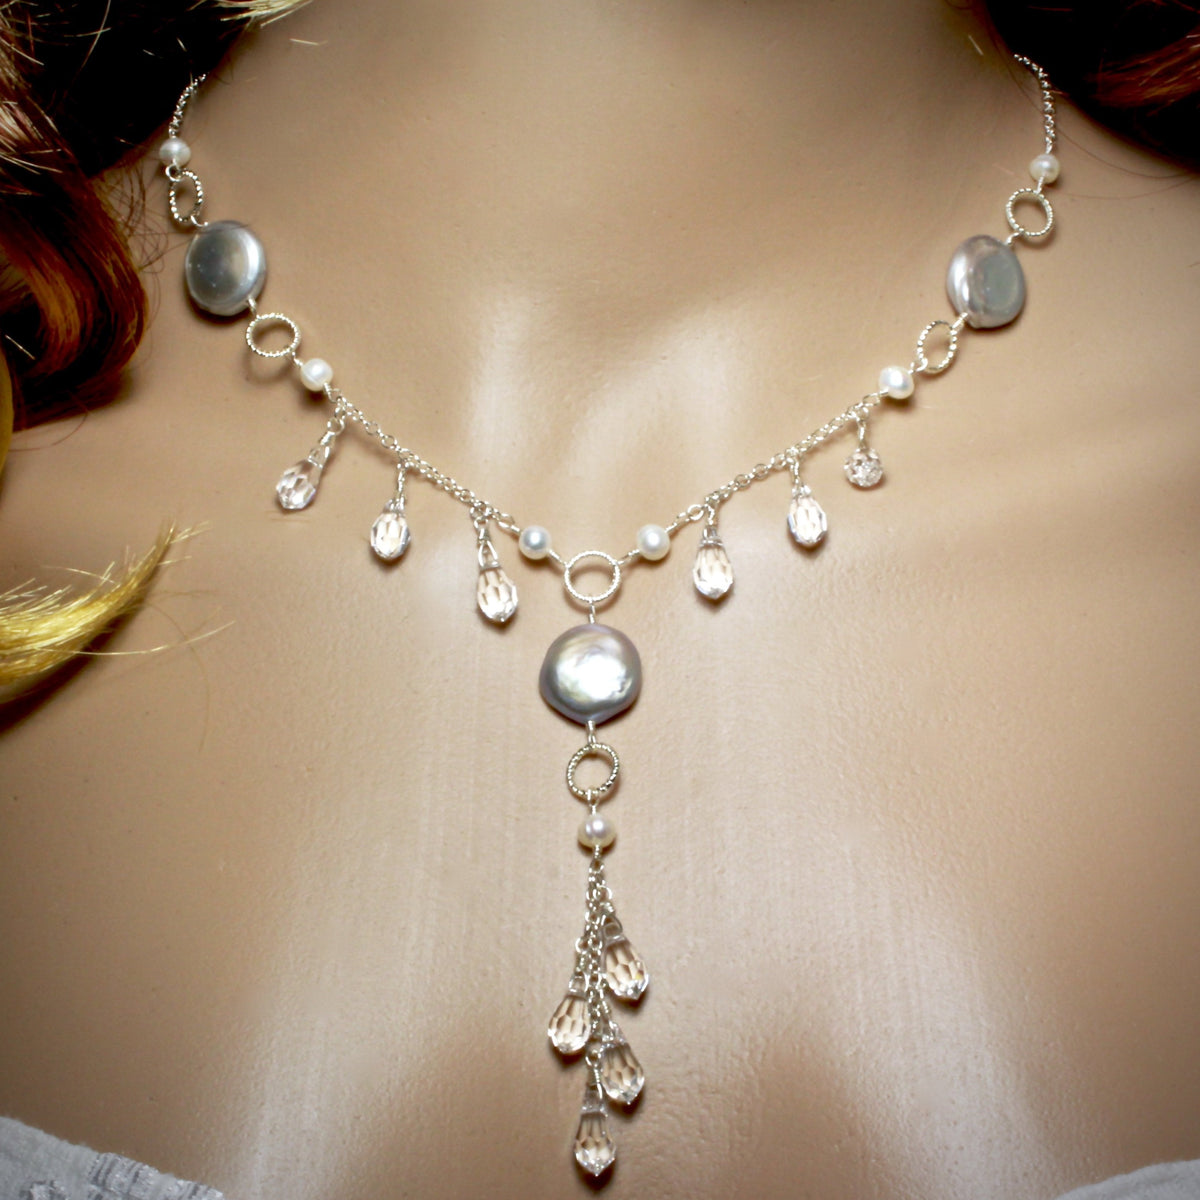 Pearl Bridal Necklace, Prom Jewelry, Simple Pearl Necklace, Pearl and Crystal  Necklace, Pageant Jewelry, Swarovski Pearl Necklace, Bridal Jewelry,  Wedding Necklace | KyKy's Bridal, Handmade Bridal Jewelry, Wedding Jewelry